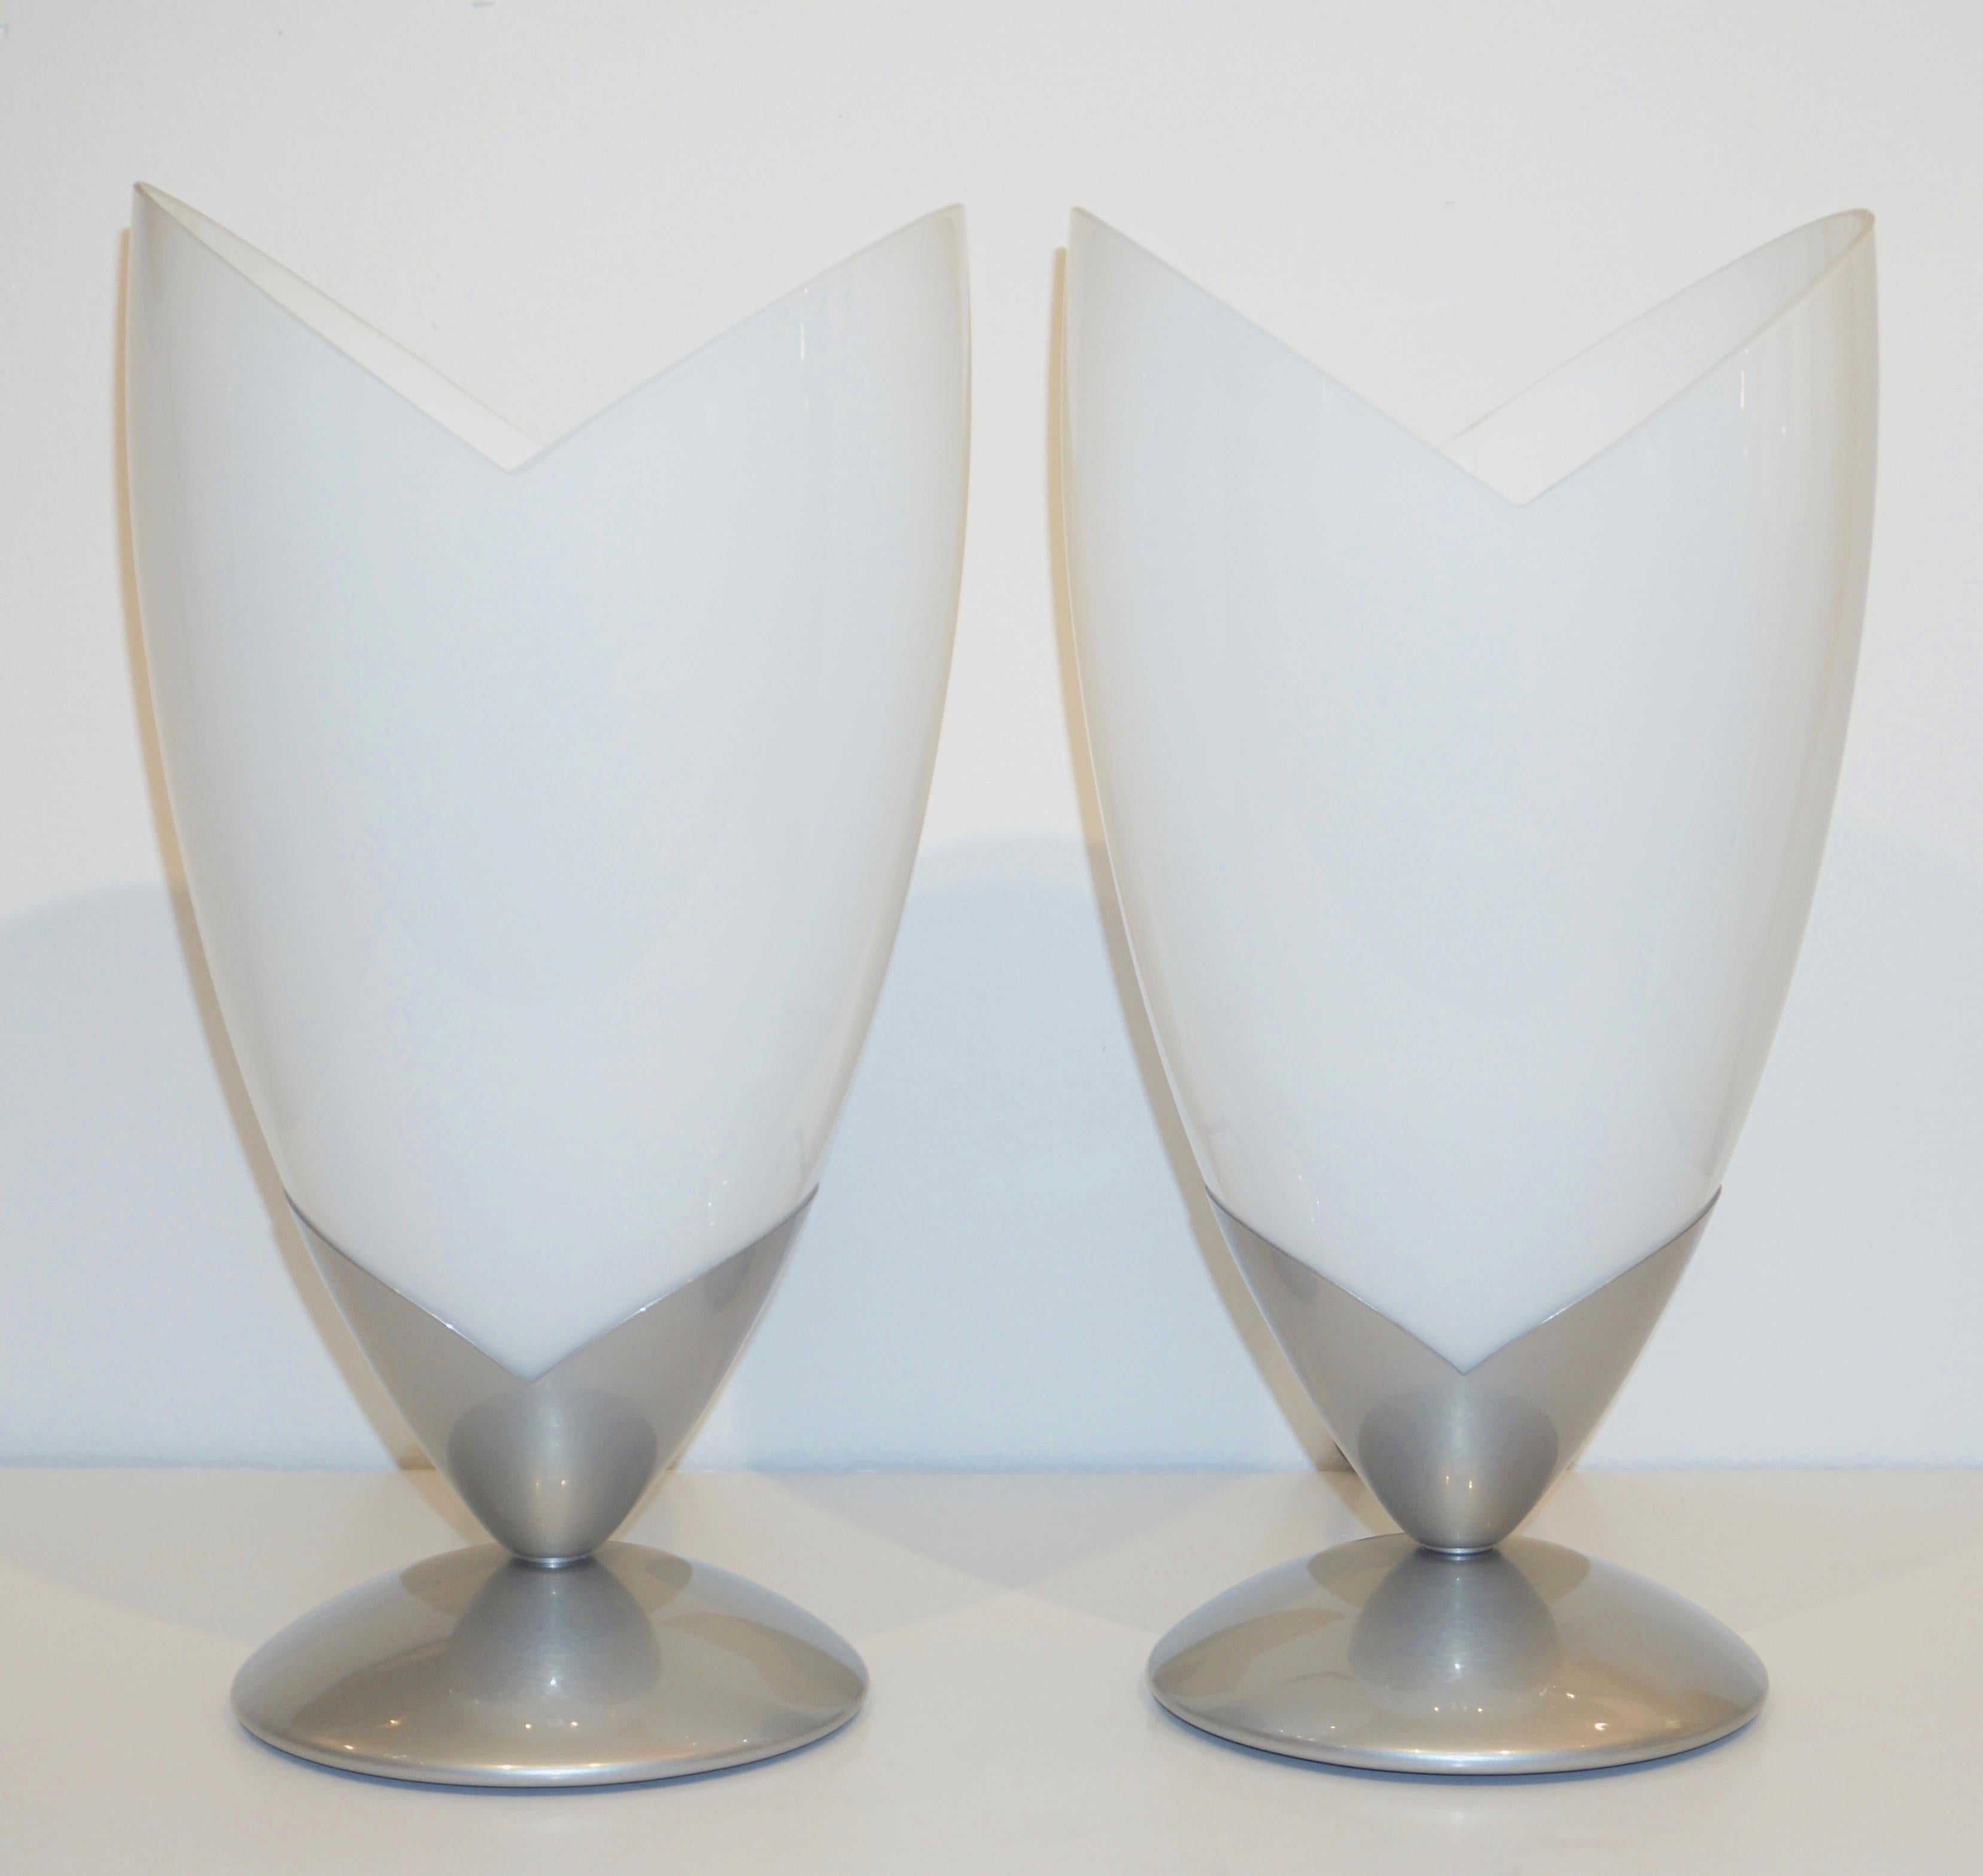 Opaline Glass 1970s Italian Pair of Satin Nickel & White Glass Organic Tulip Lamps by Tronconi For Sale